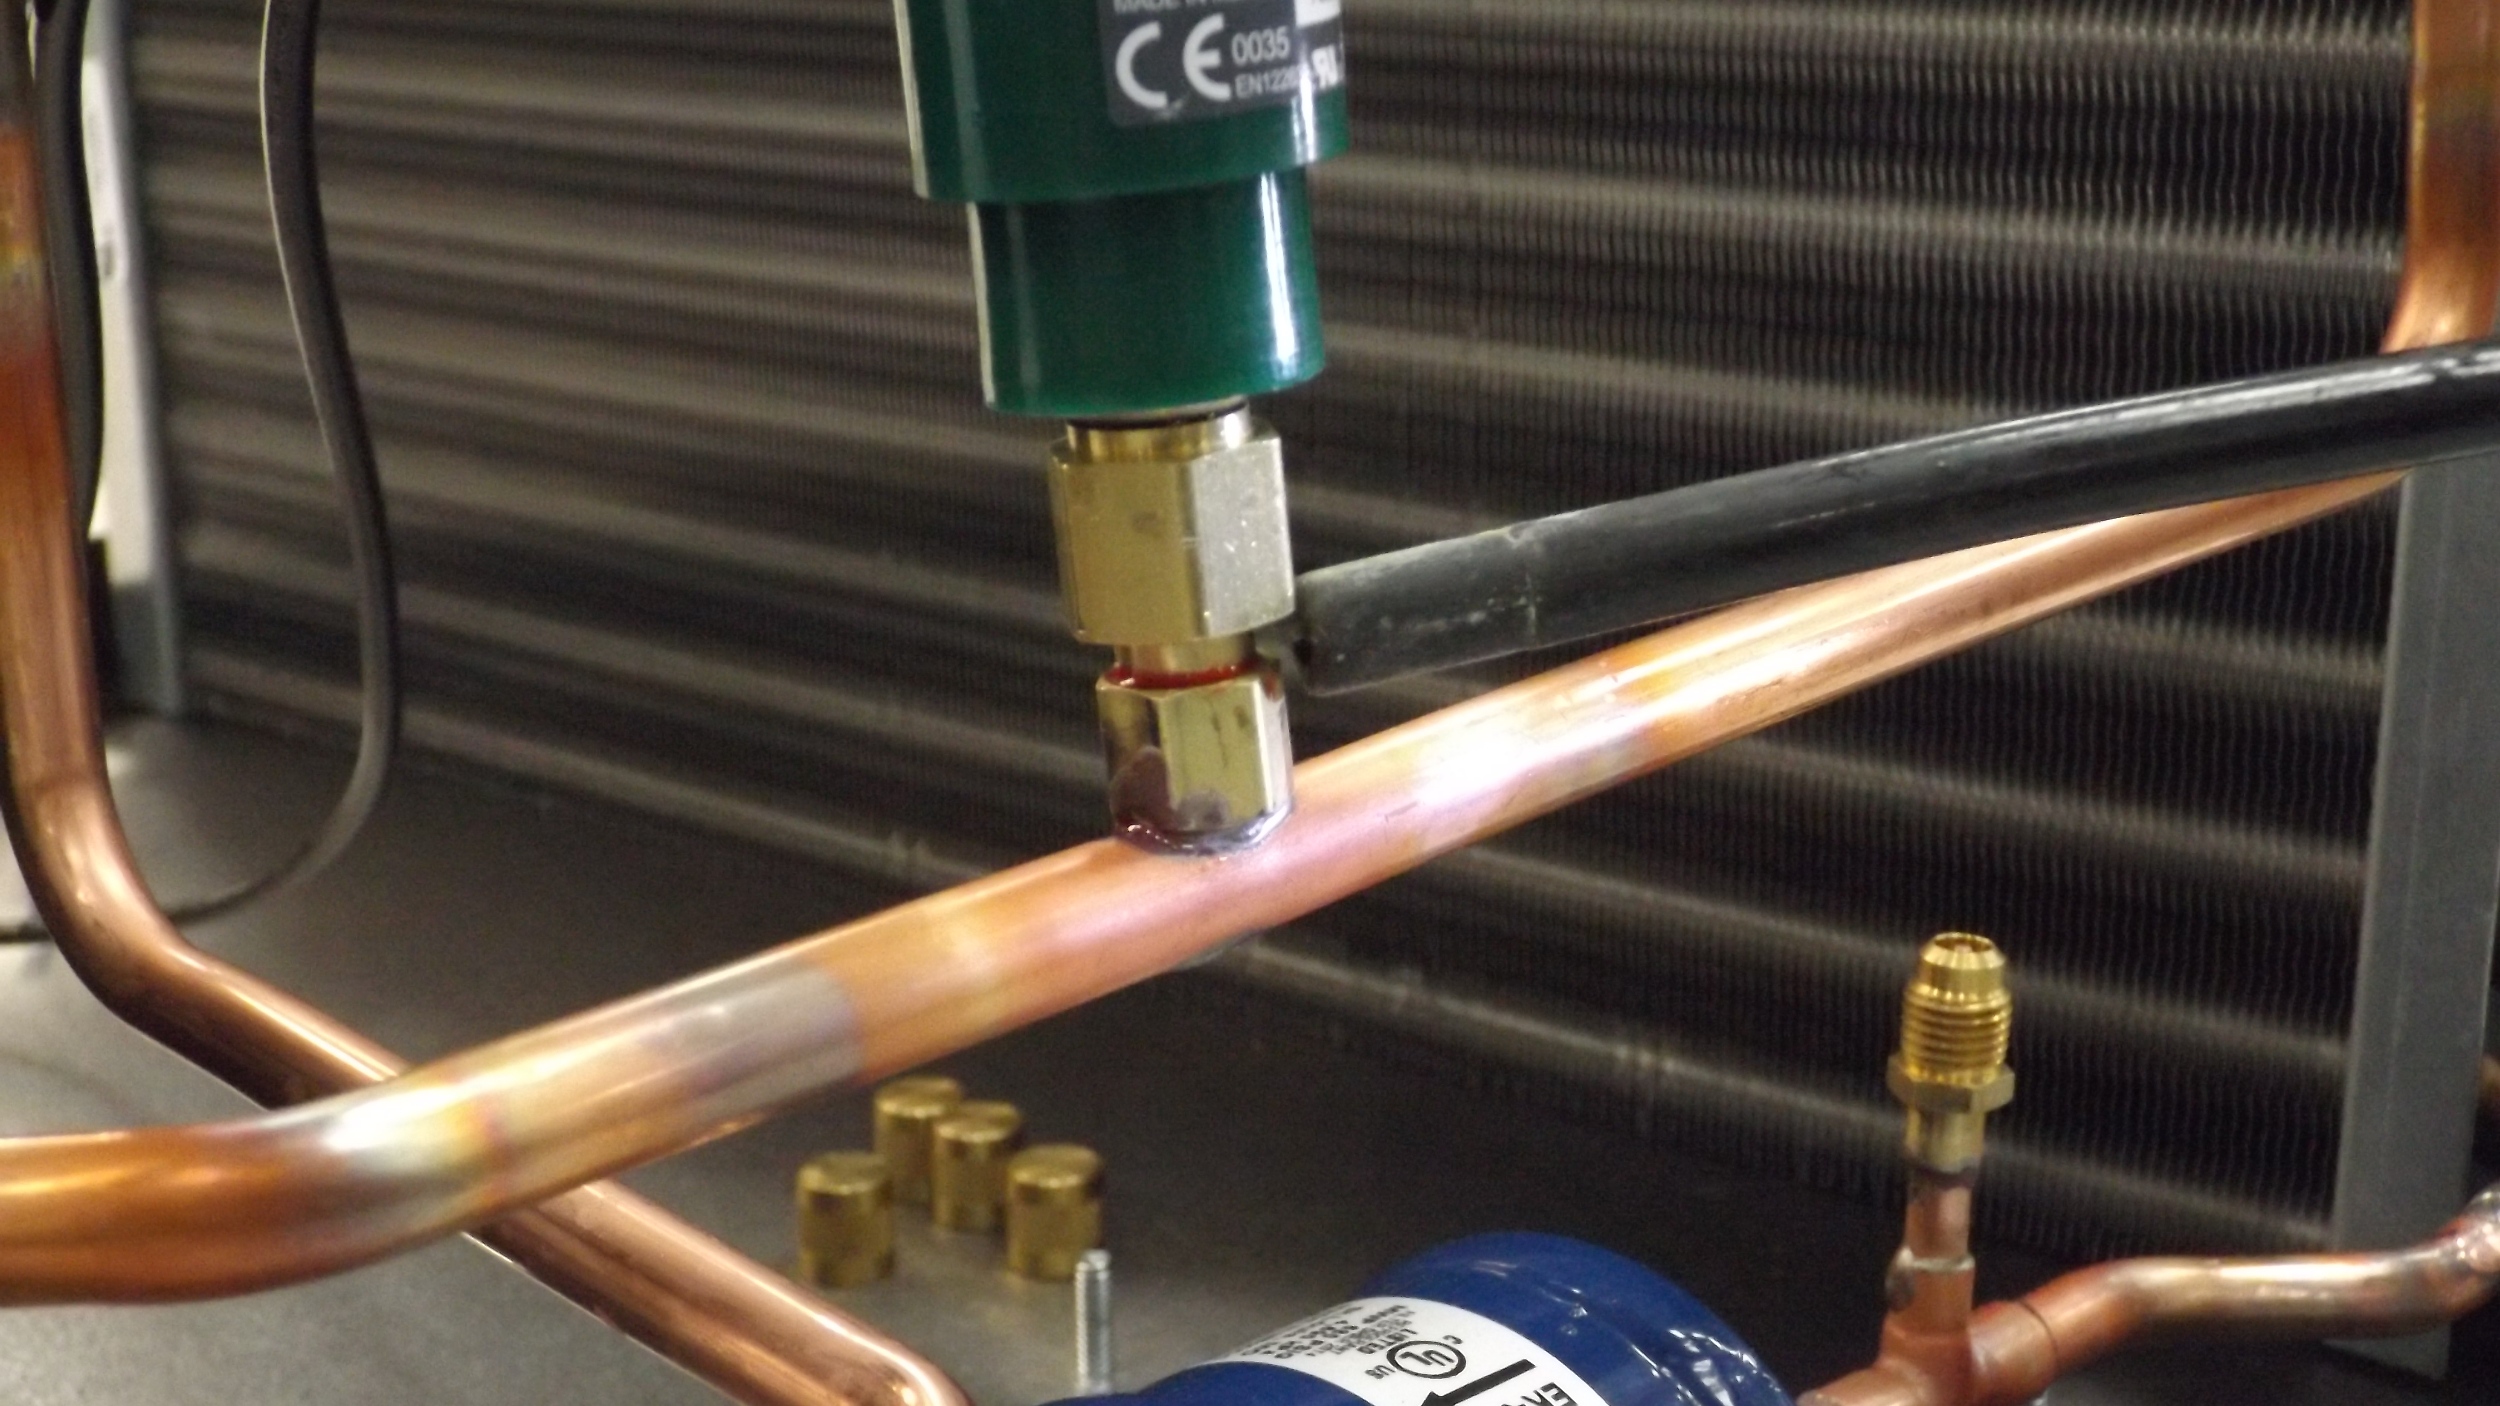 A helium leak detector is used to check all brazing locations on every Wine Guardian TTW cooling system.The detector has improved first-pass yield to 100% in recent months.